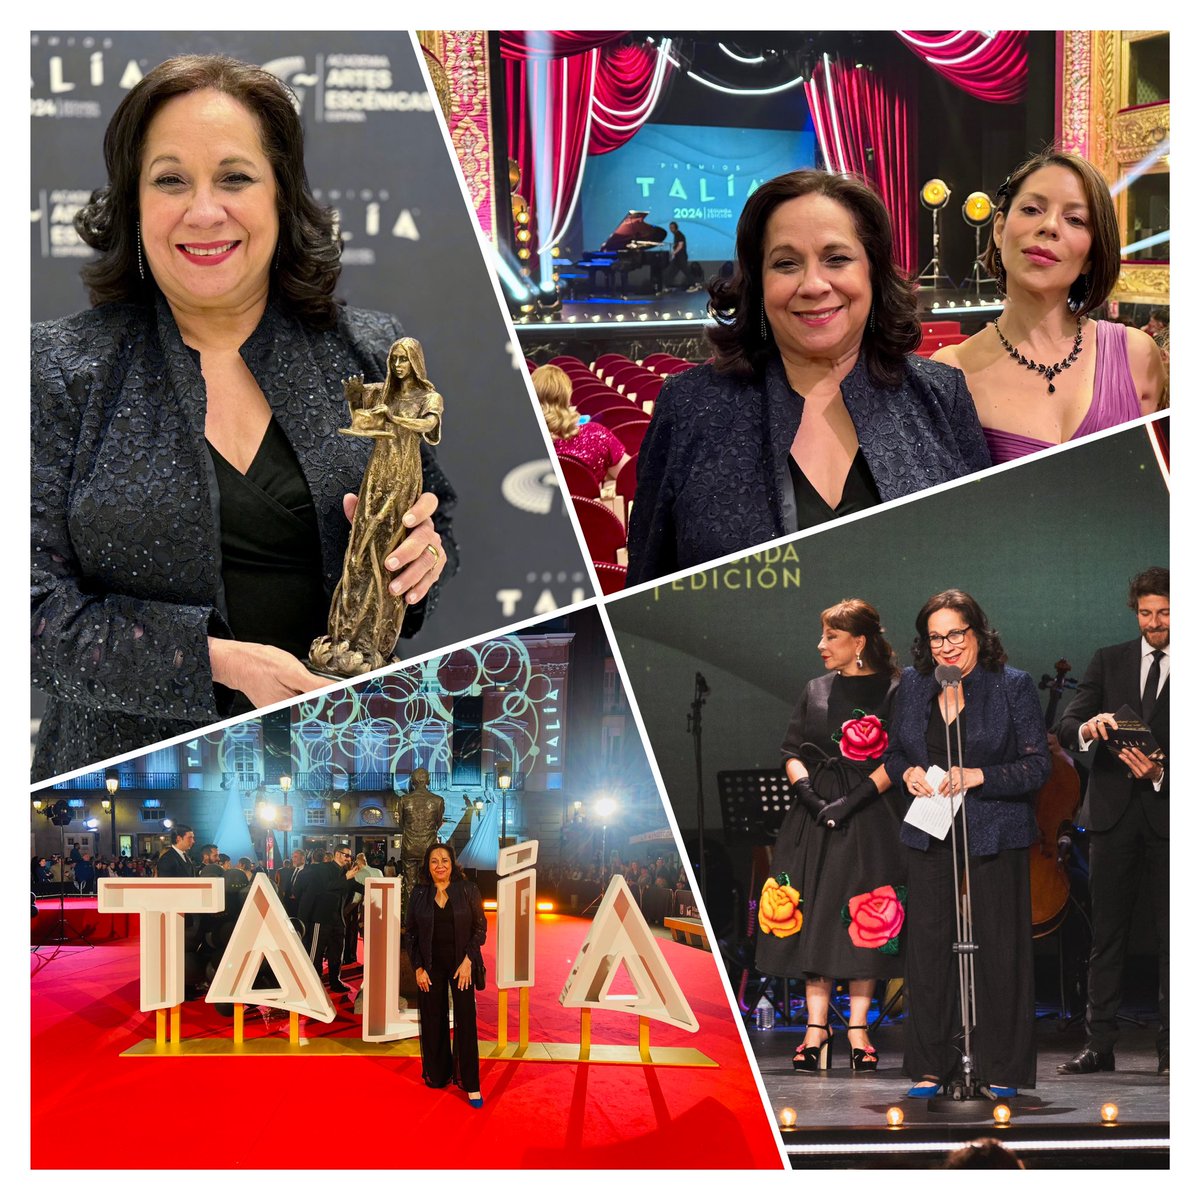 WE DID IT!! I am still in a daze after the amazing experience at the Academy for the Performing Arts of Spain’s Awards Gala. GRACIAS to the Academy for awarding a PREMIO TALÍA to PregonesPRTT for our production THE RED ROSE in its International category. @academia_aaee